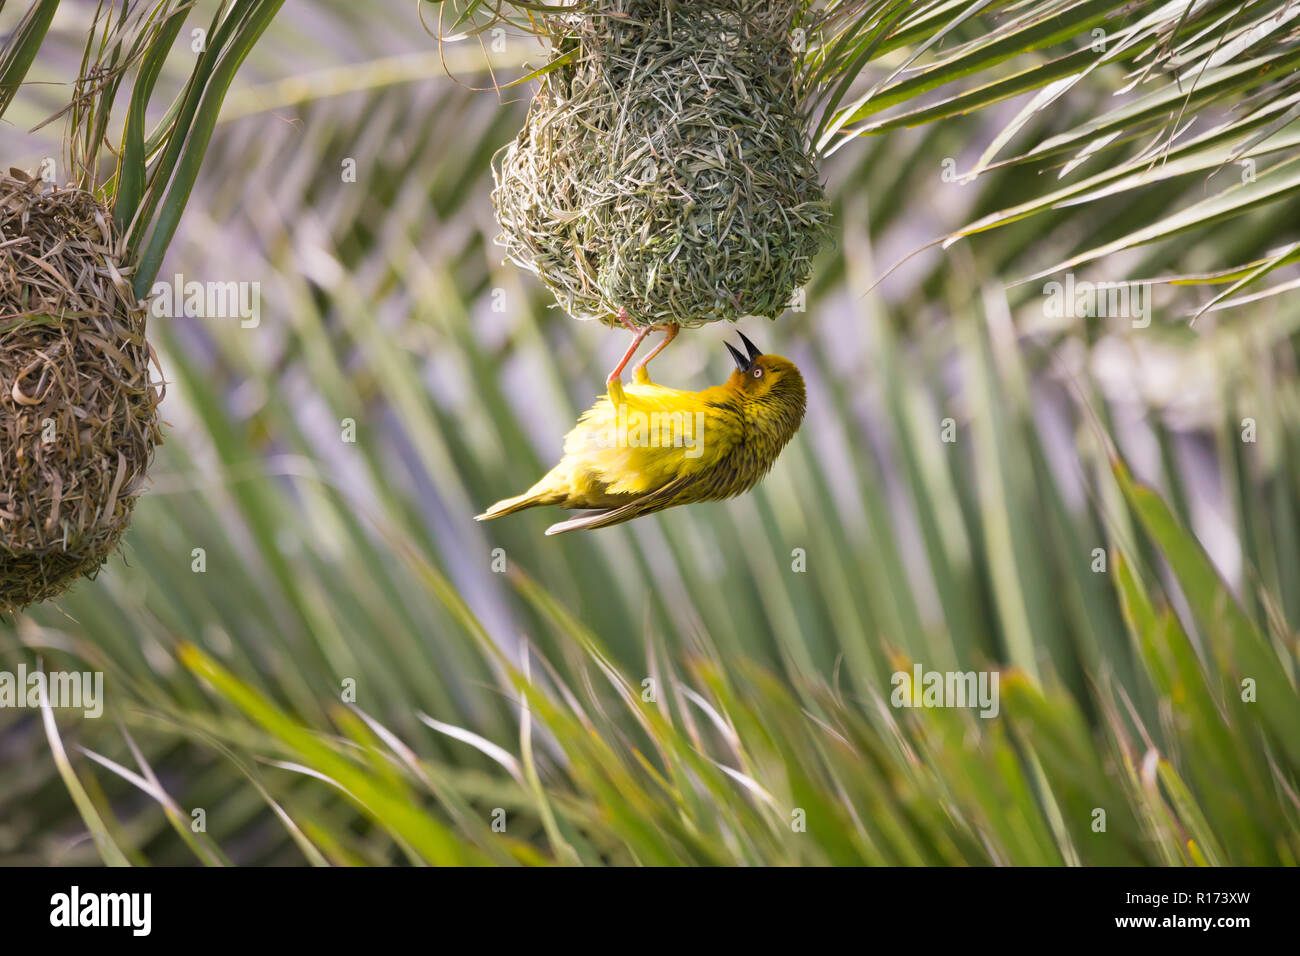 Cape Weaver (Ploceus capensis)  bird hangs upside down on its woven nest in a palm tree Stock Photo